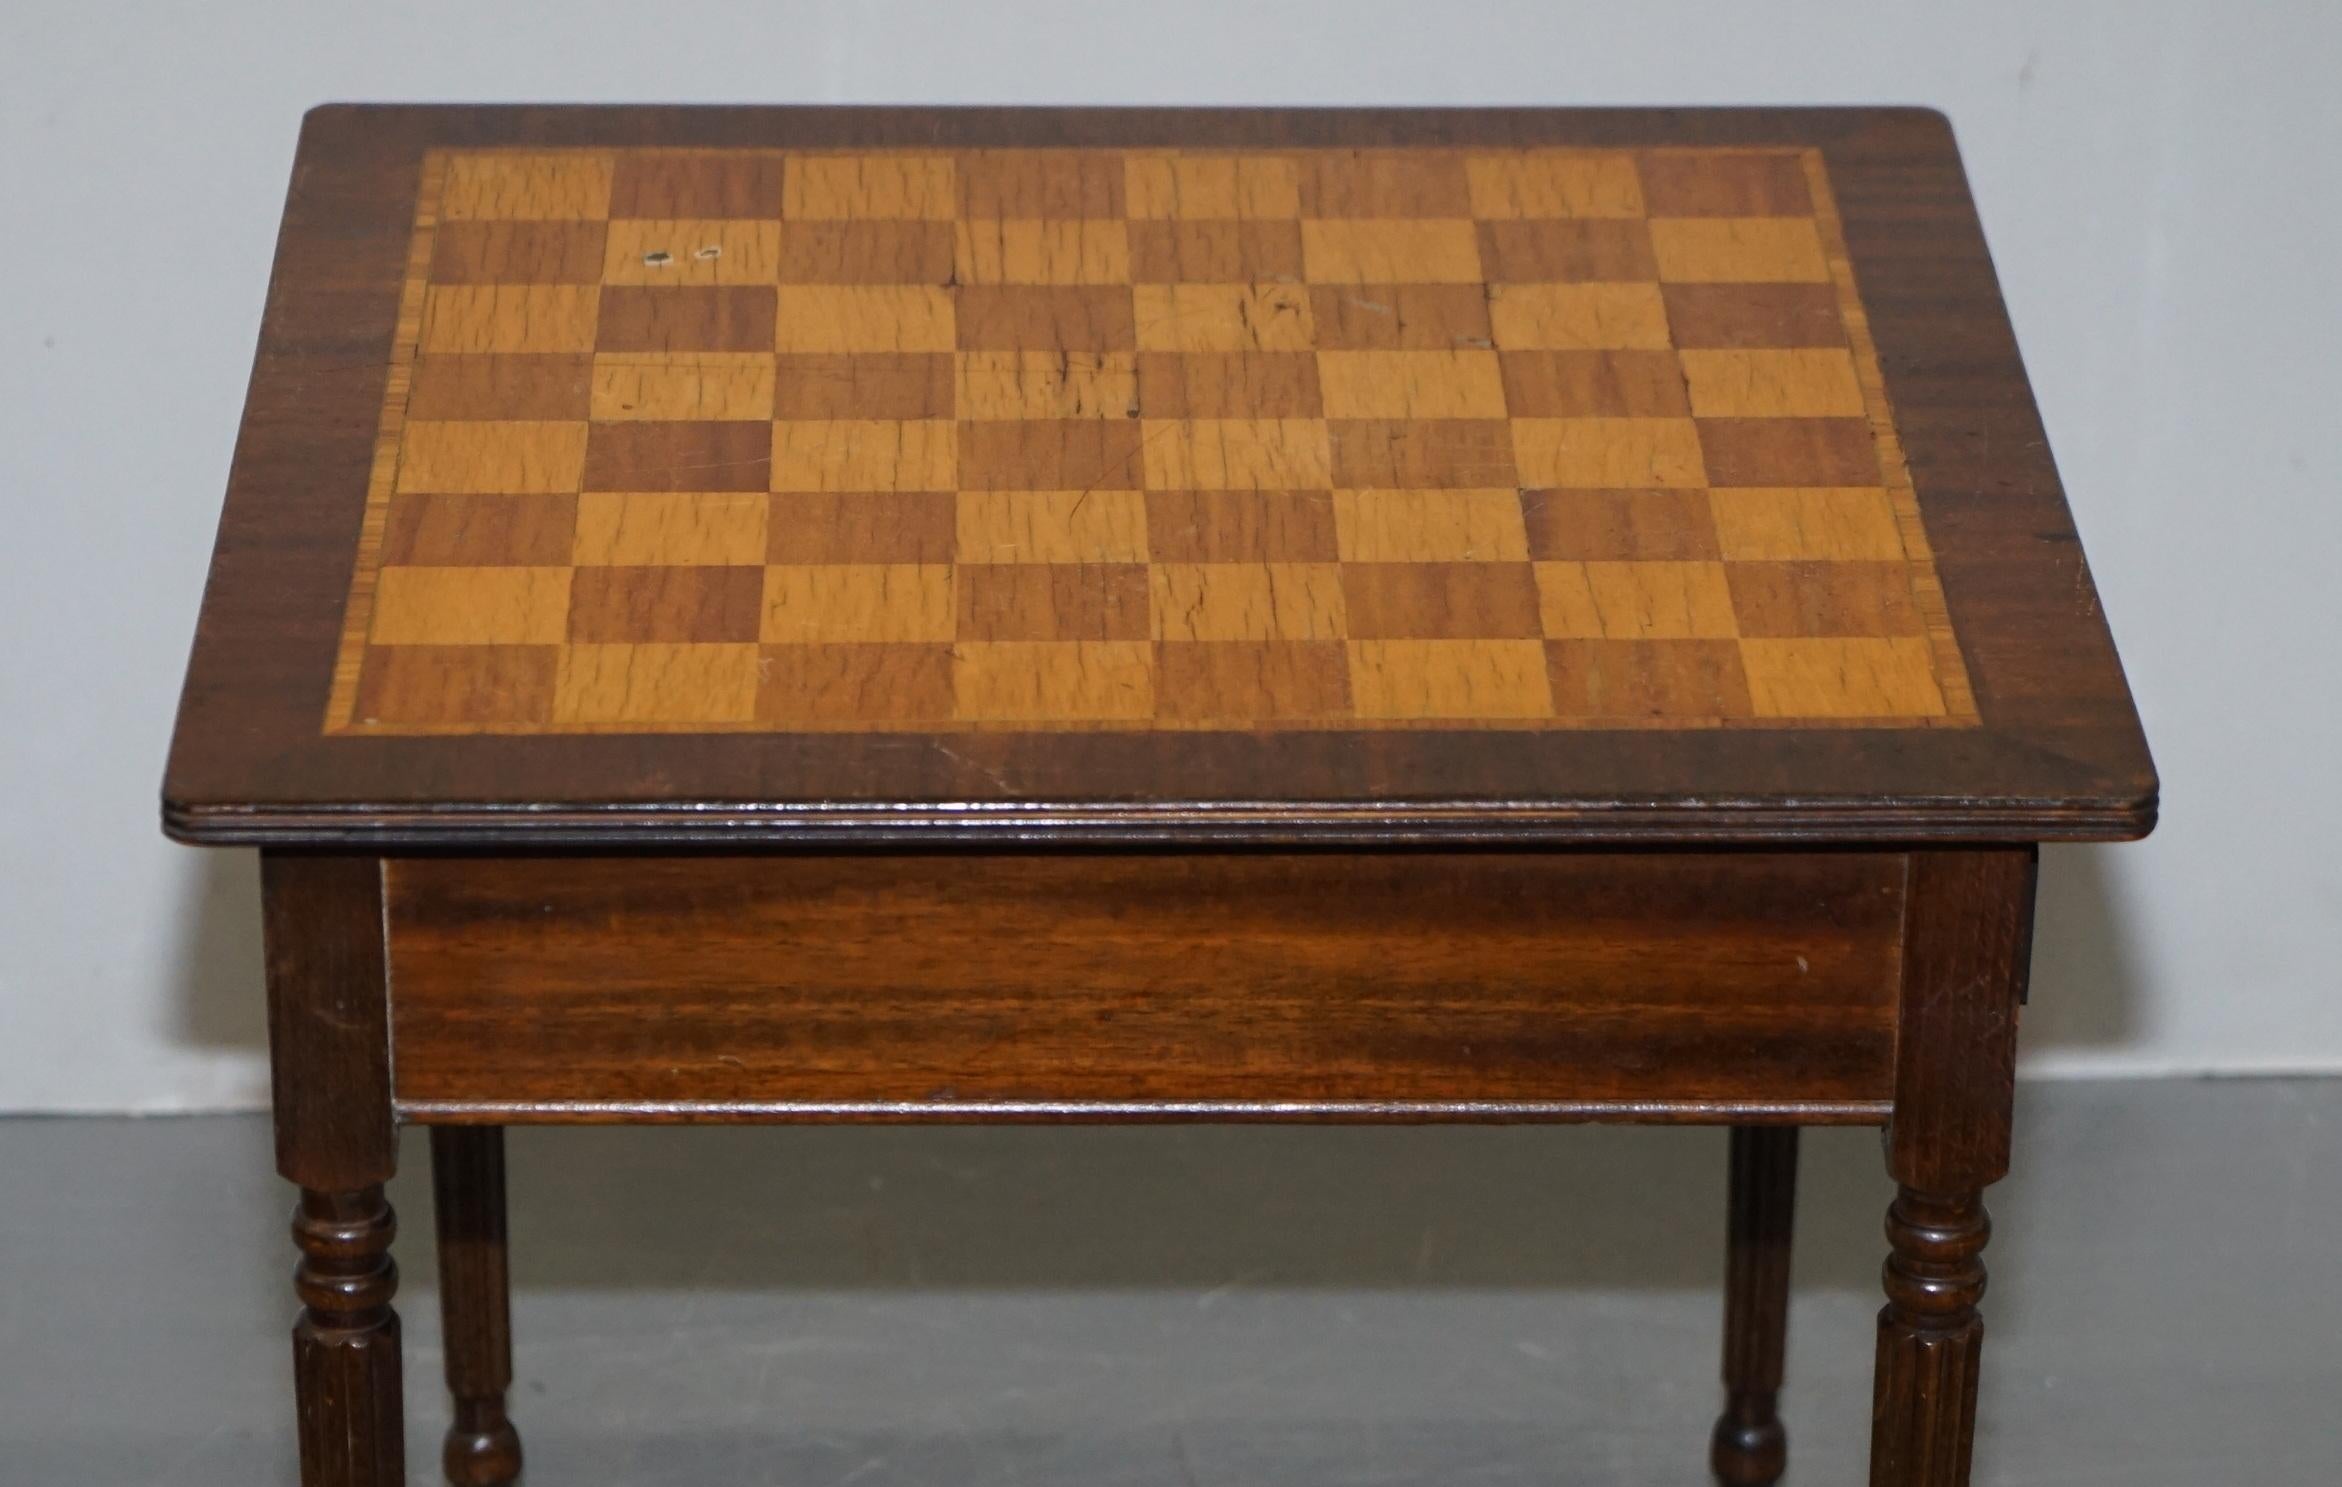 Vintage Walnut & Hardwood Marquetry Inlaid Chess Board Games Table with Drawer For Sale 4